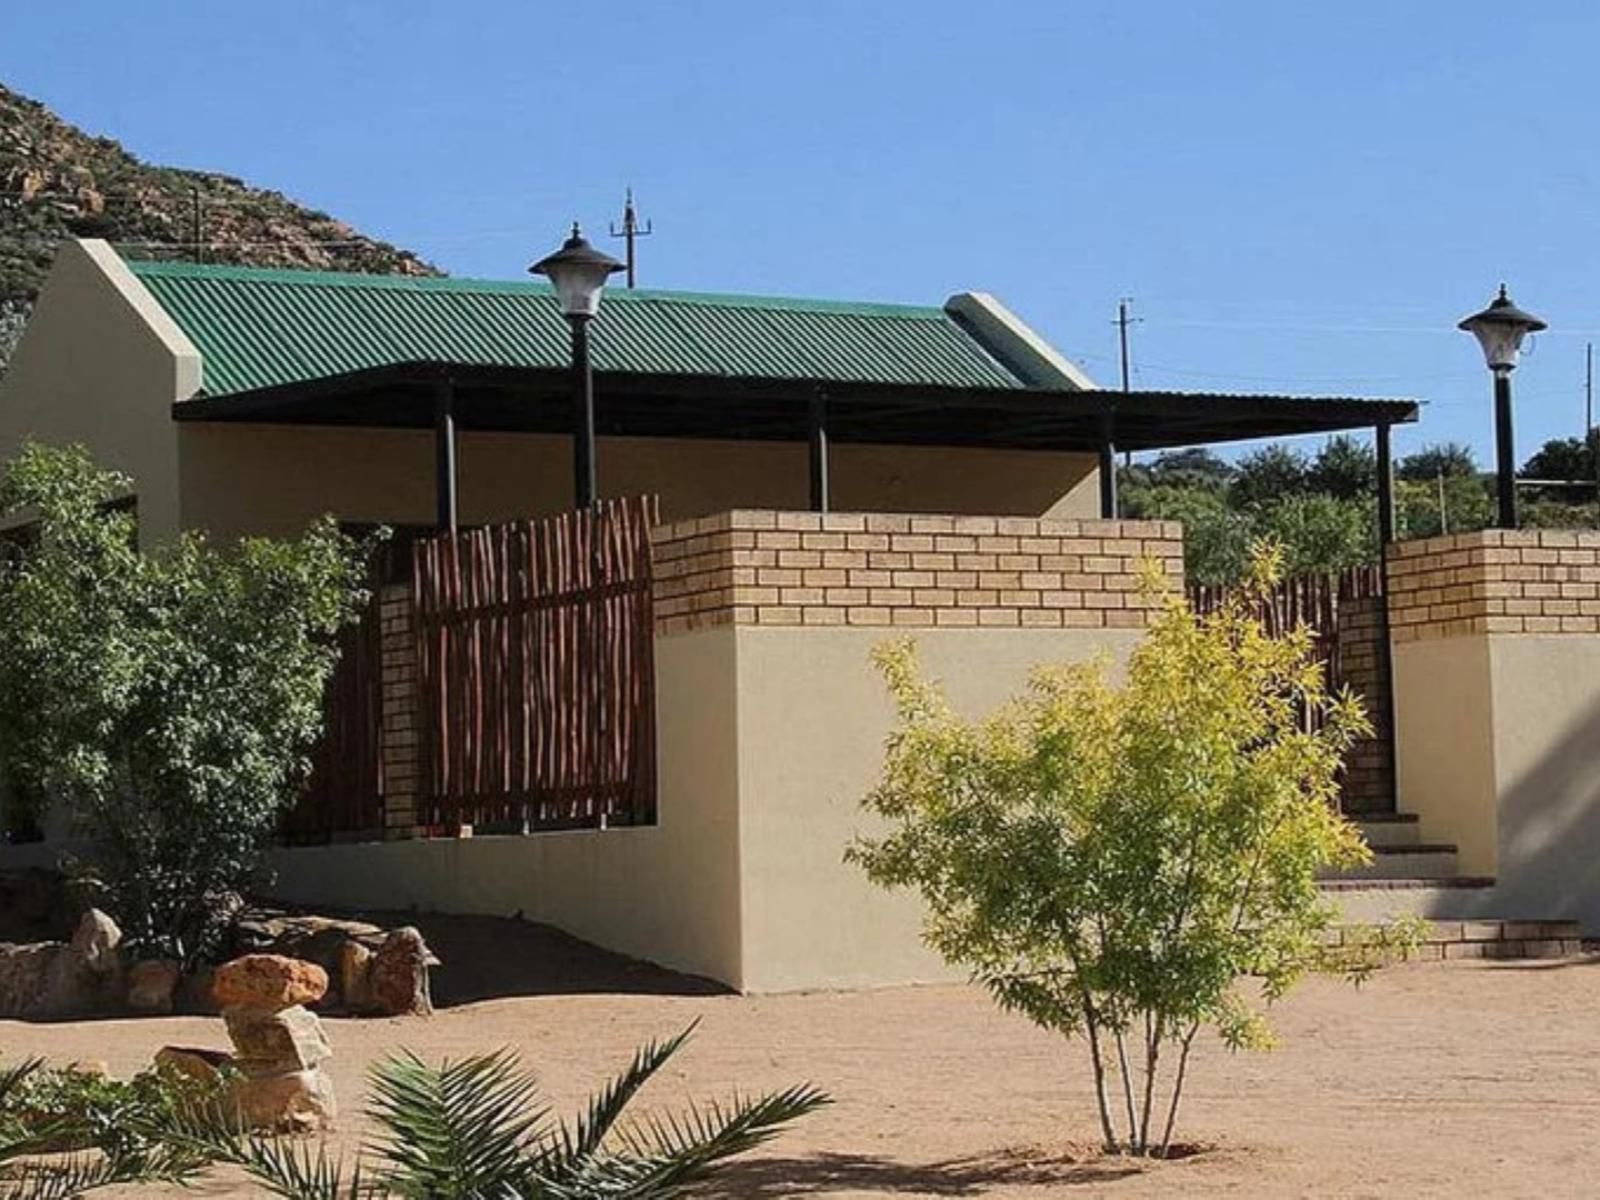 Namastat Lodge And Caravan Park Springbok Northern Cape South Africa Complementary Colors